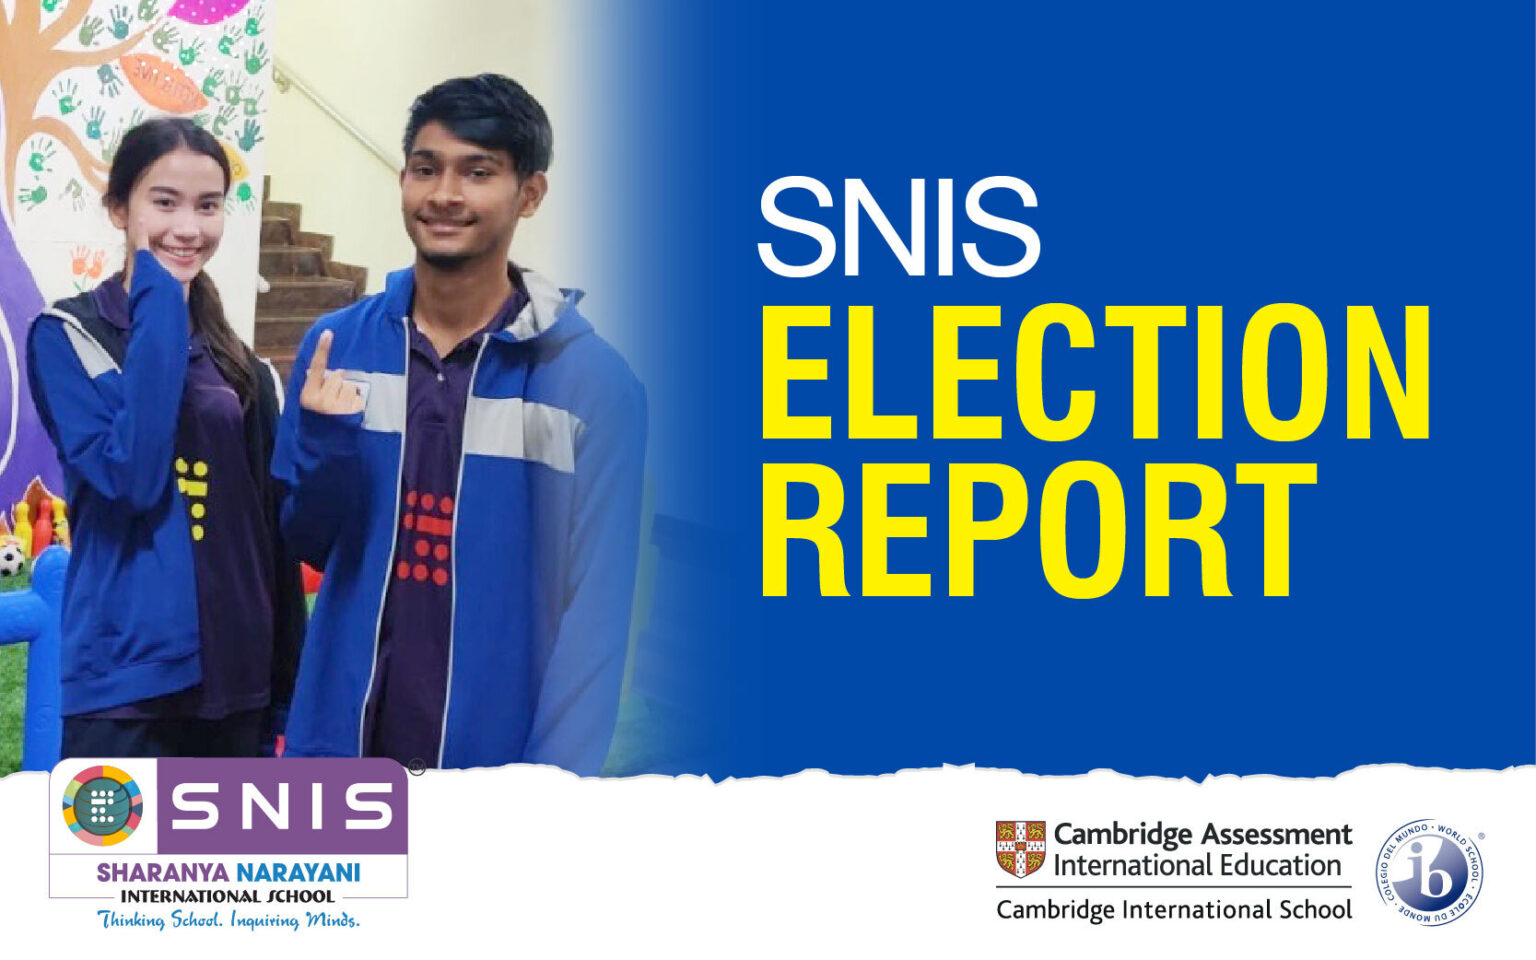 SNIS SNIS Election Report